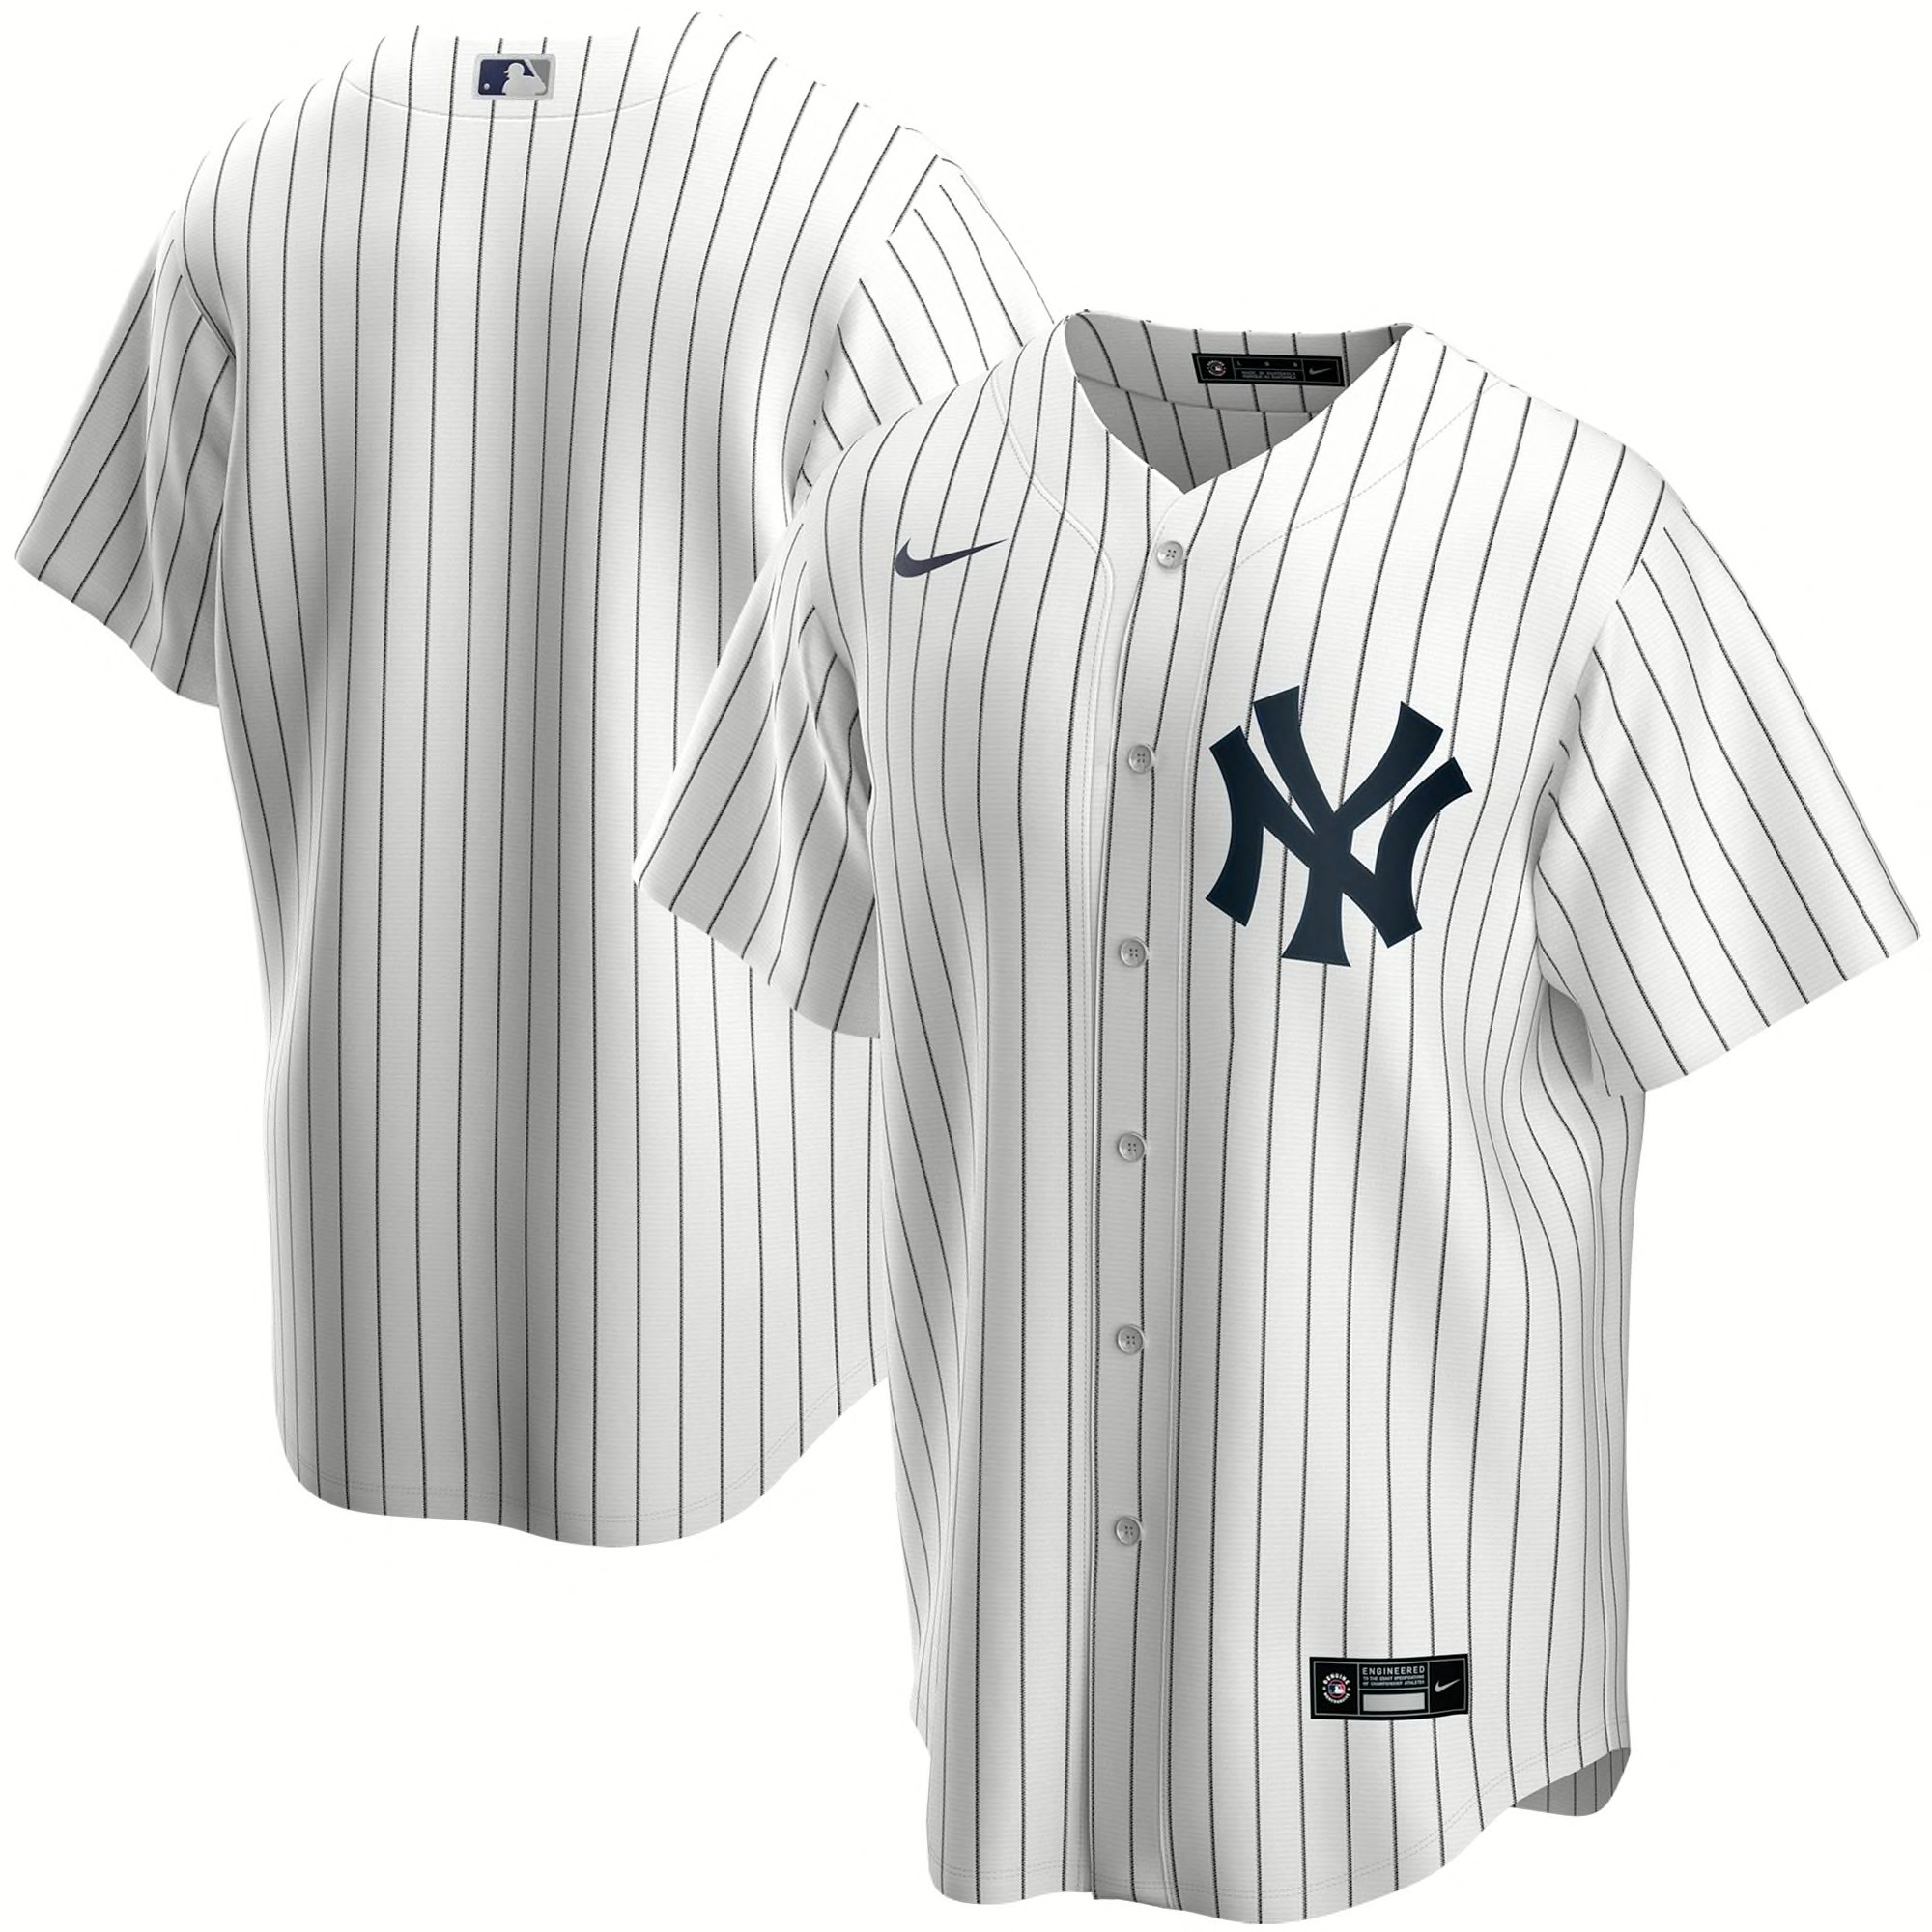 yankees father's day jersey